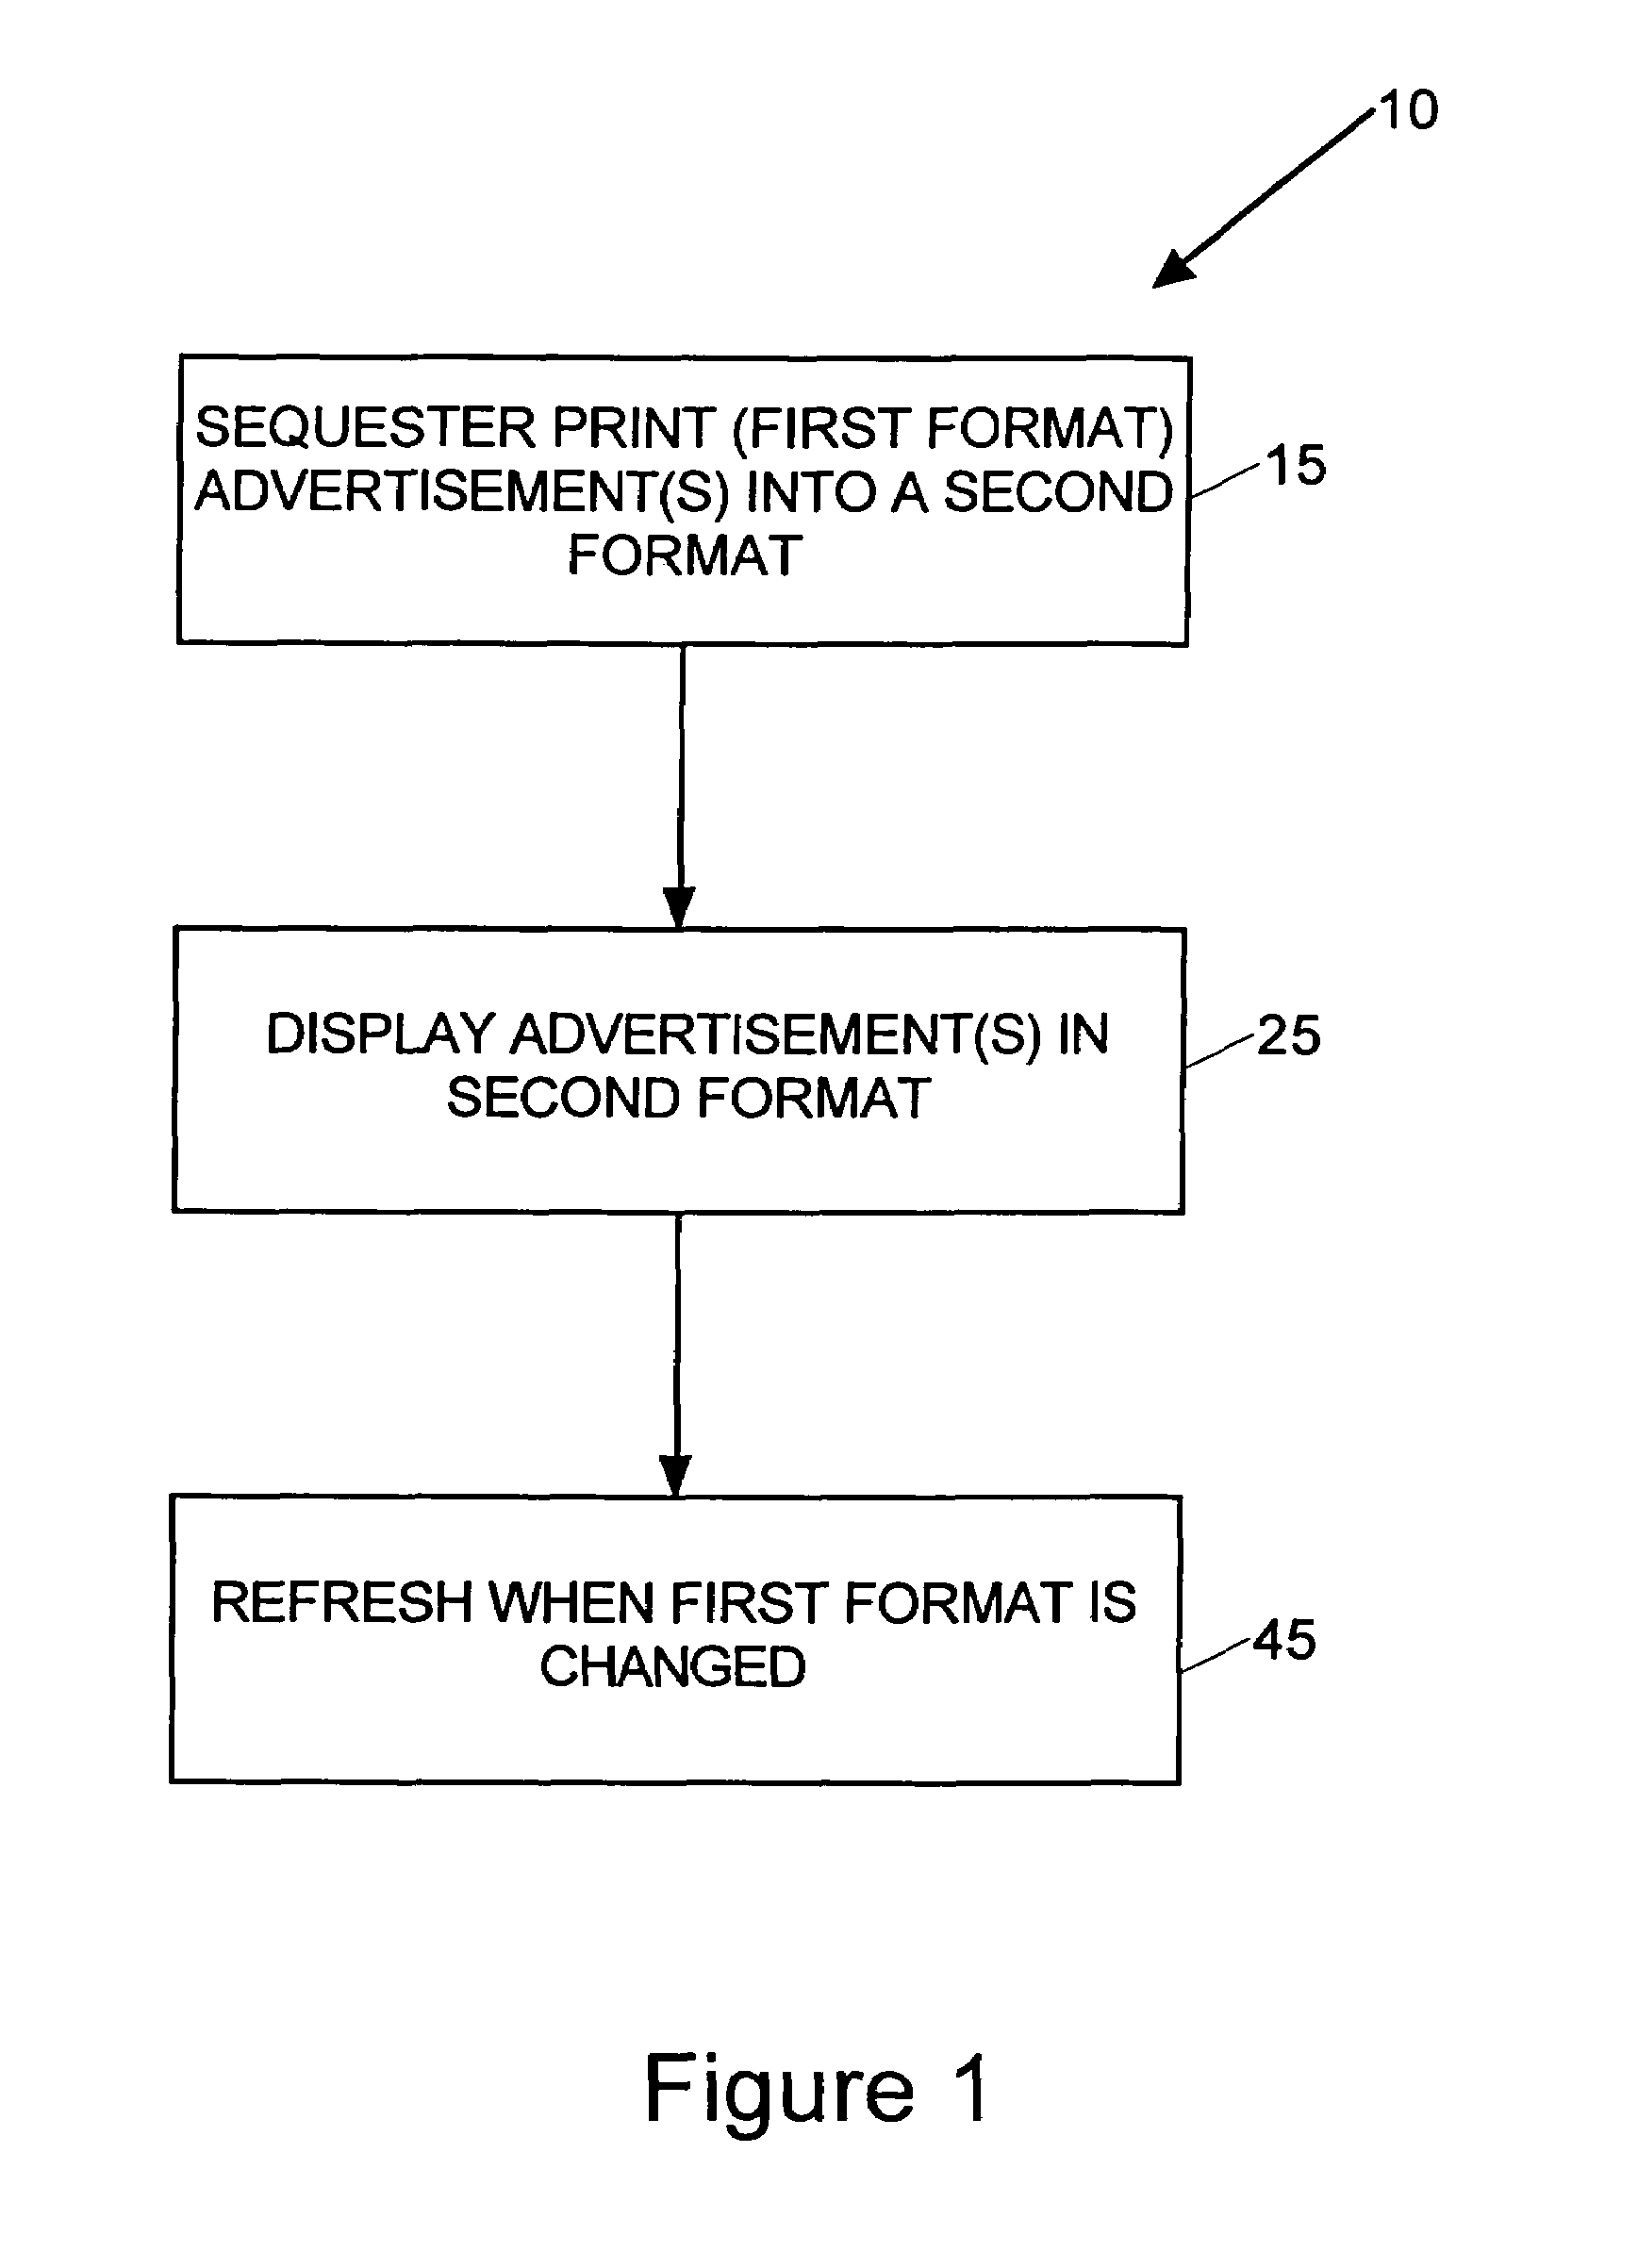 System for sequestering print advertisements and displaying the advertisements on an electronic medium